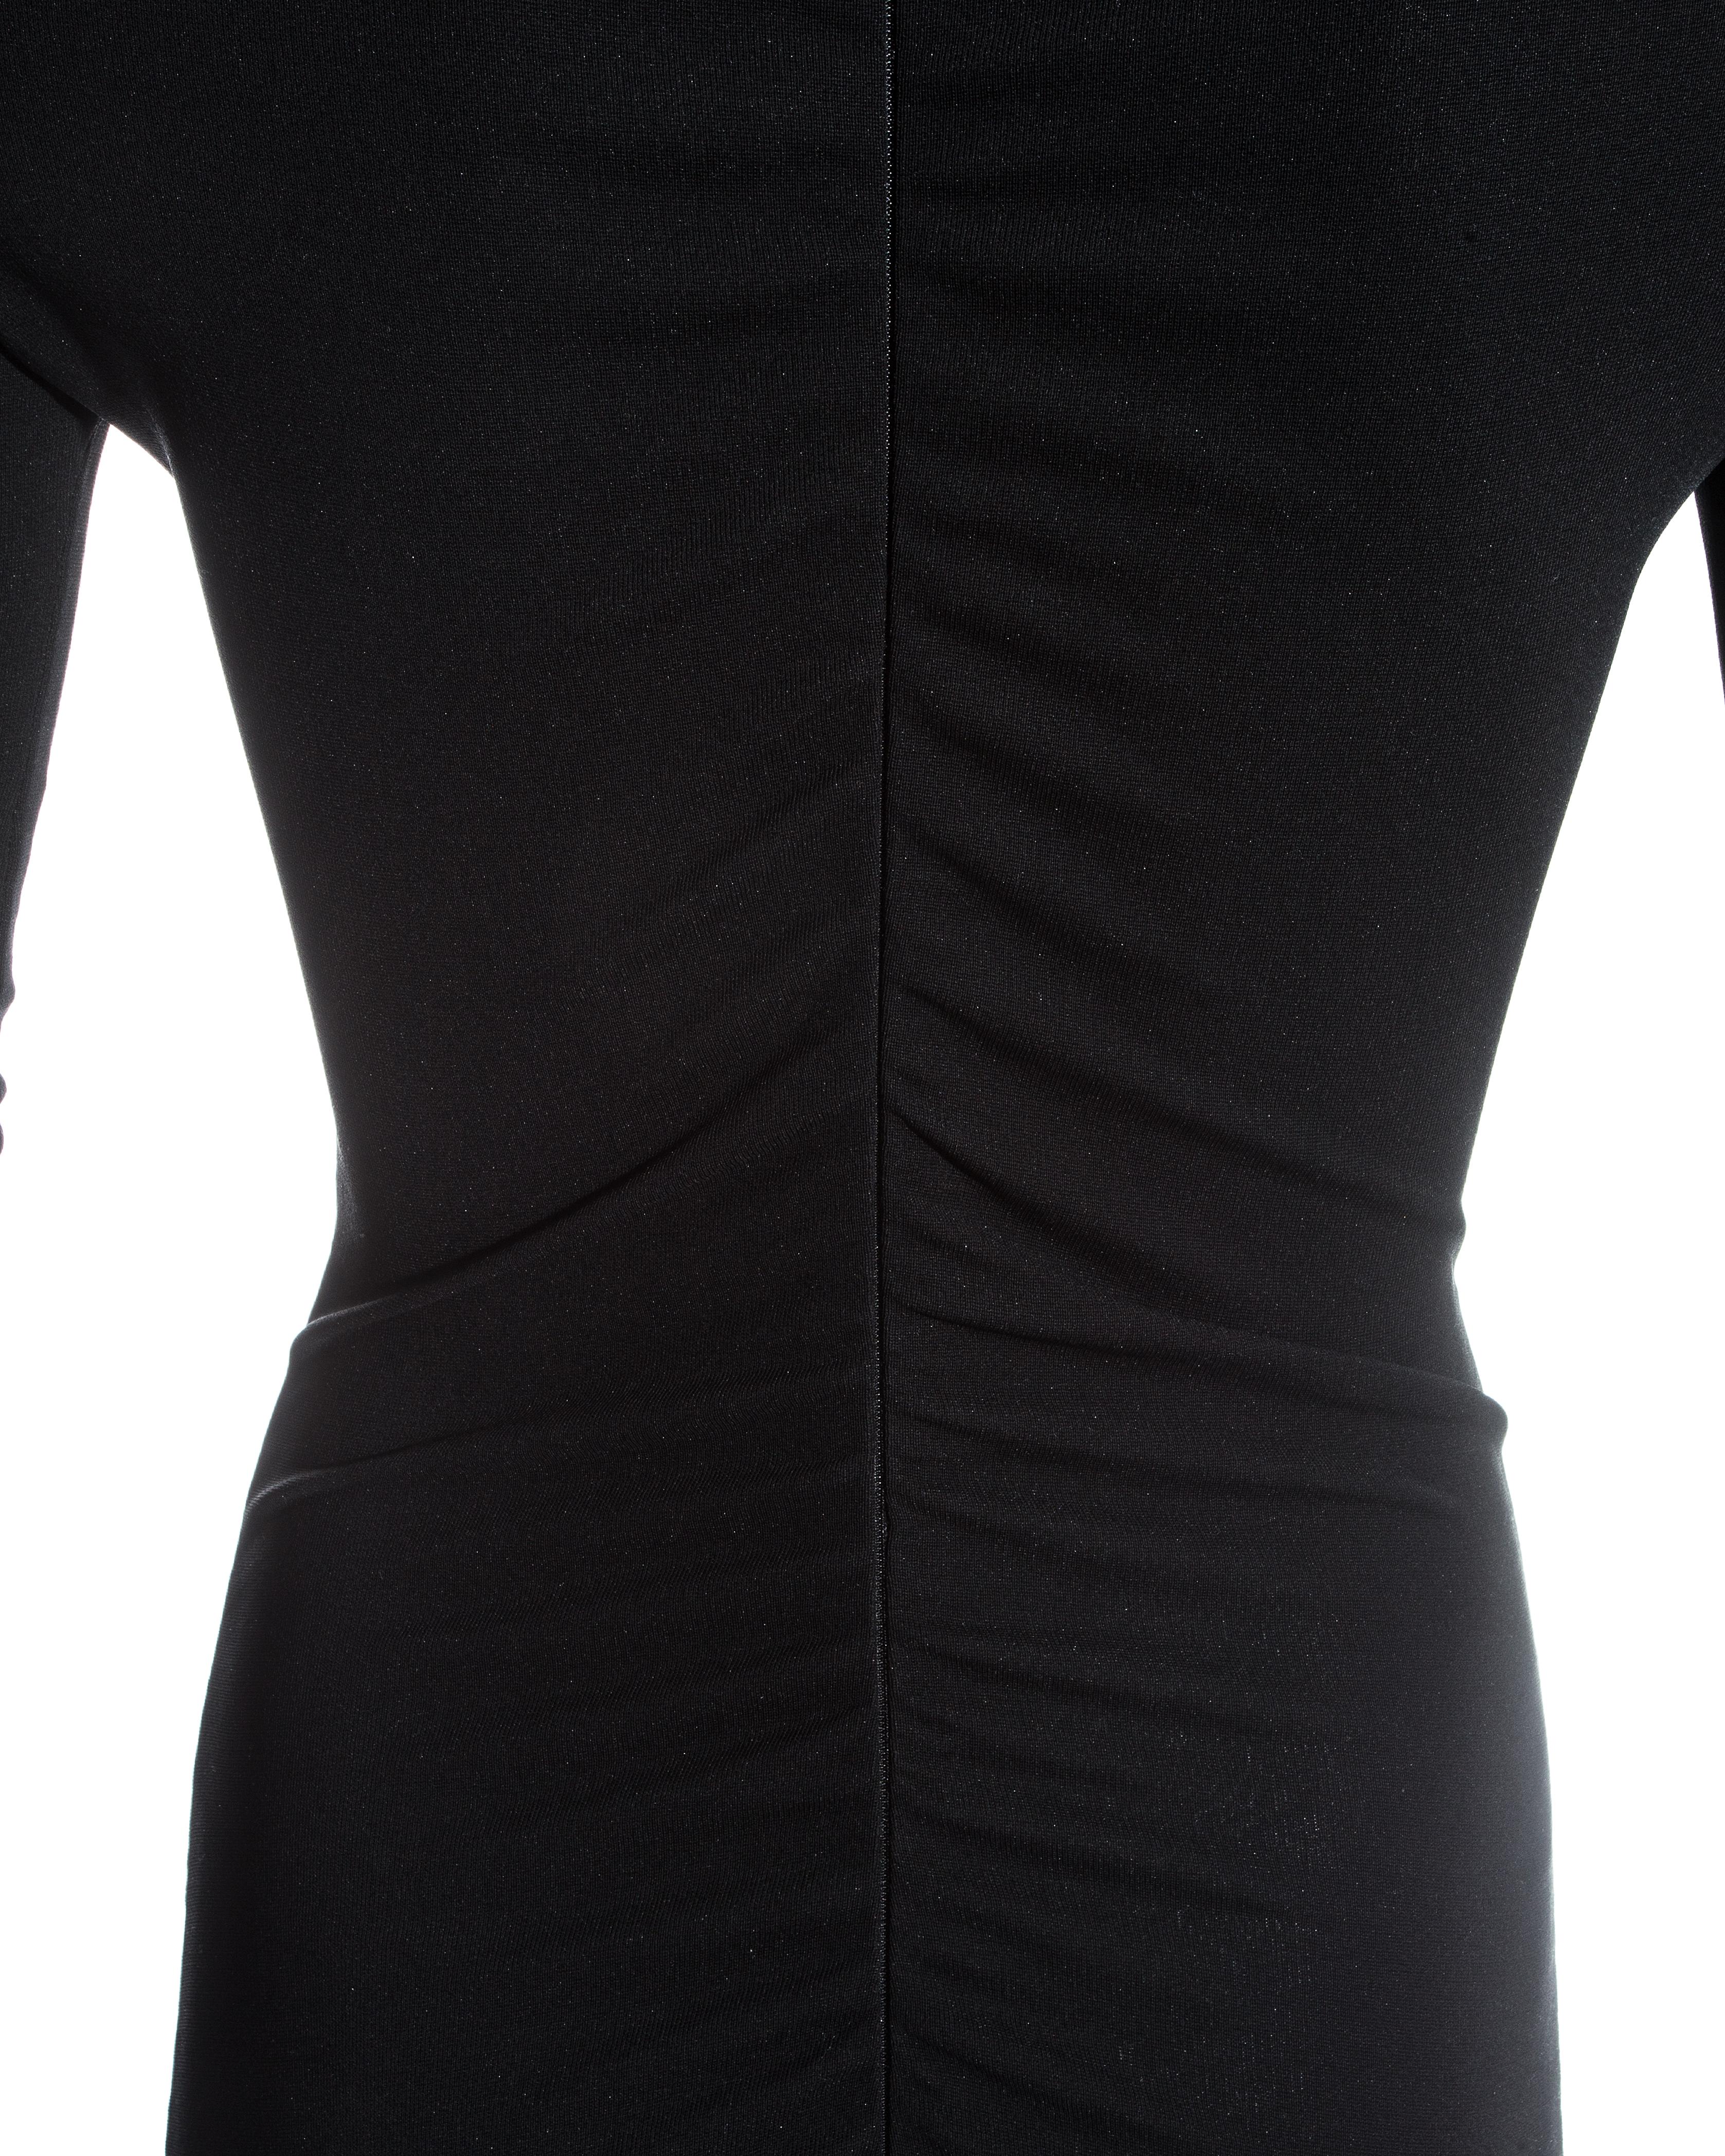 Black Dolce & Gabbana black spandex figure hugging maxi dress with cut out, c. 1990s For Sale